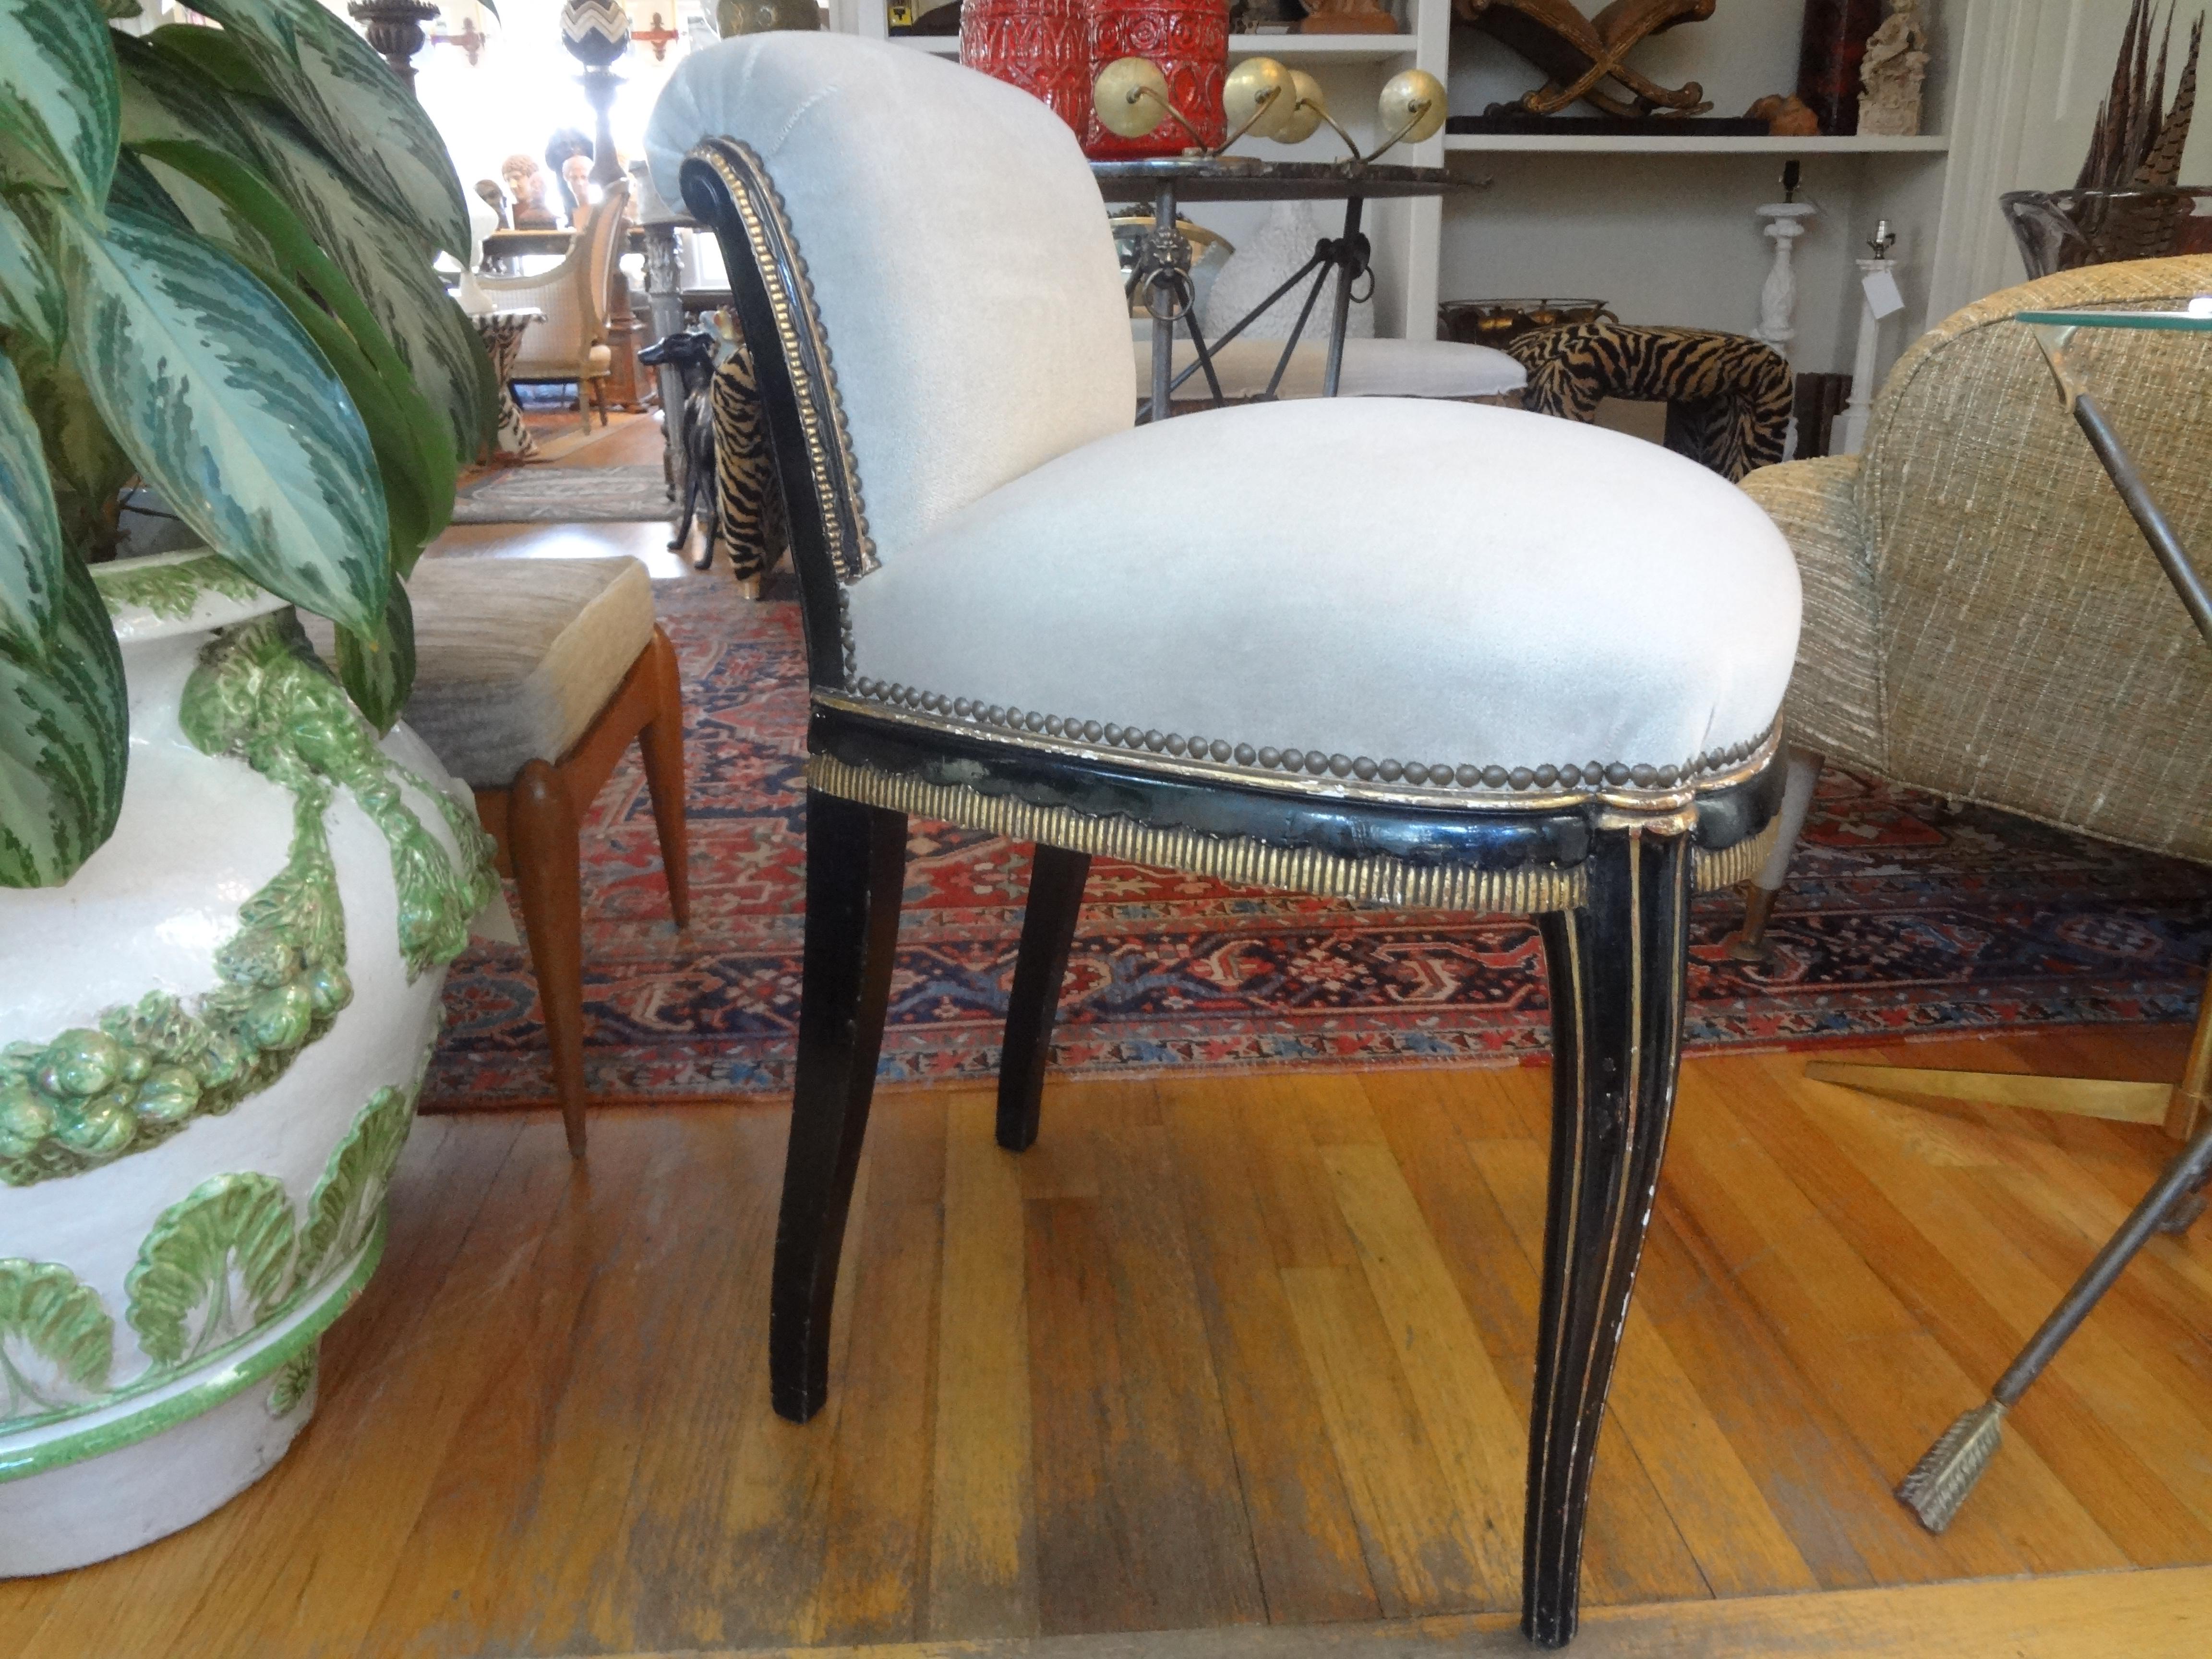 Stunning antique Italian Art Deco painted and giltwood slipper chair or vanity chair. This beautiful and comfortable chair, stool or bench has been professionally upholstered in high quality neutral taupe velvet fabric with brass nailhead detail.